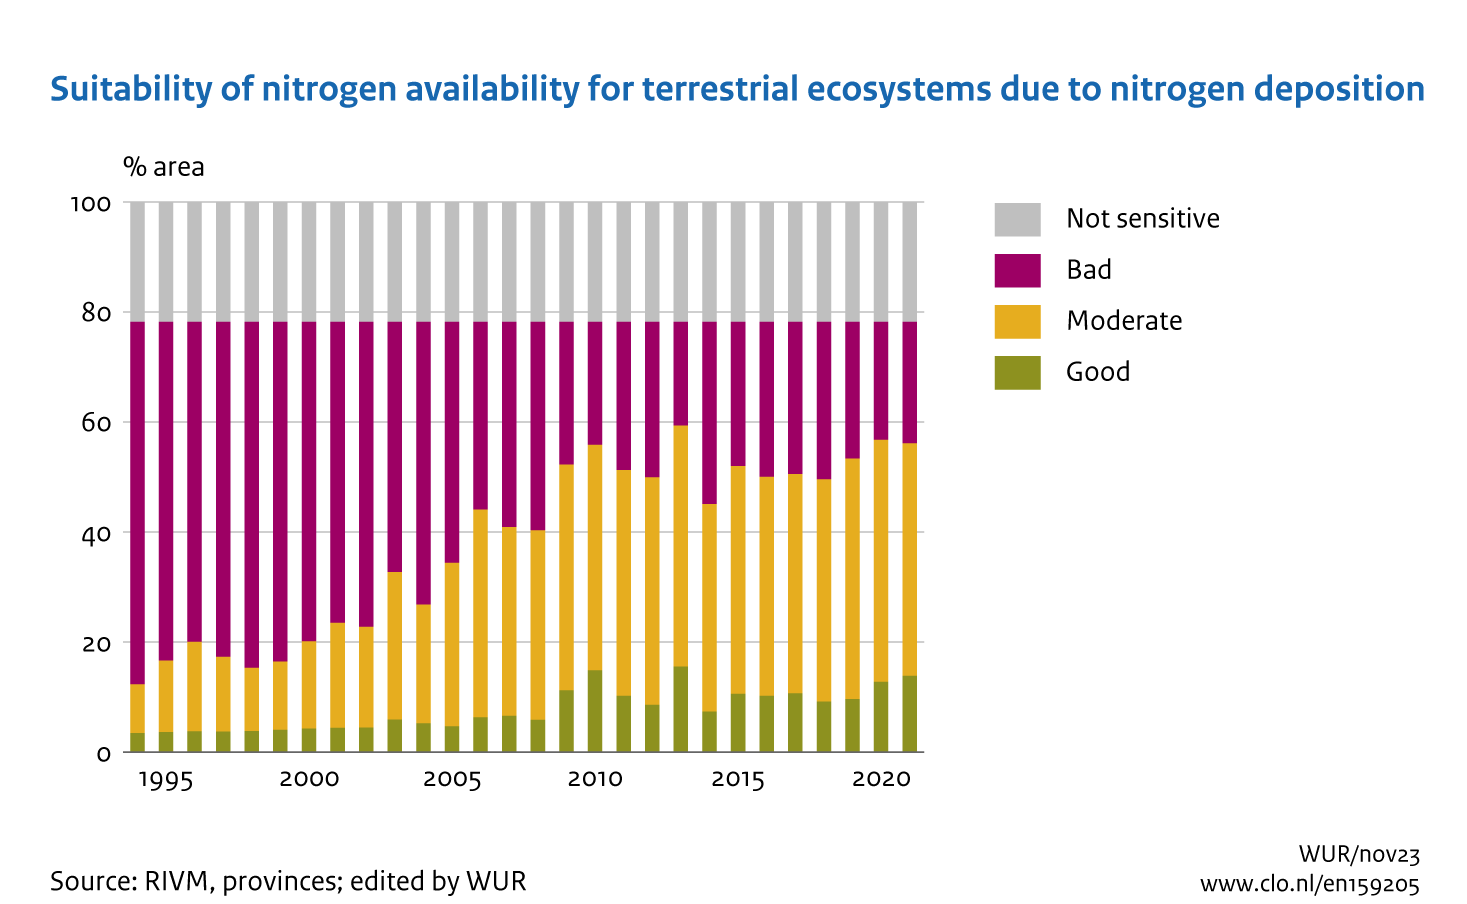 Image Suitability of nitrogen availability in terrestrial ecosystems due to nitrogen deposition. The image is further explained in the text.